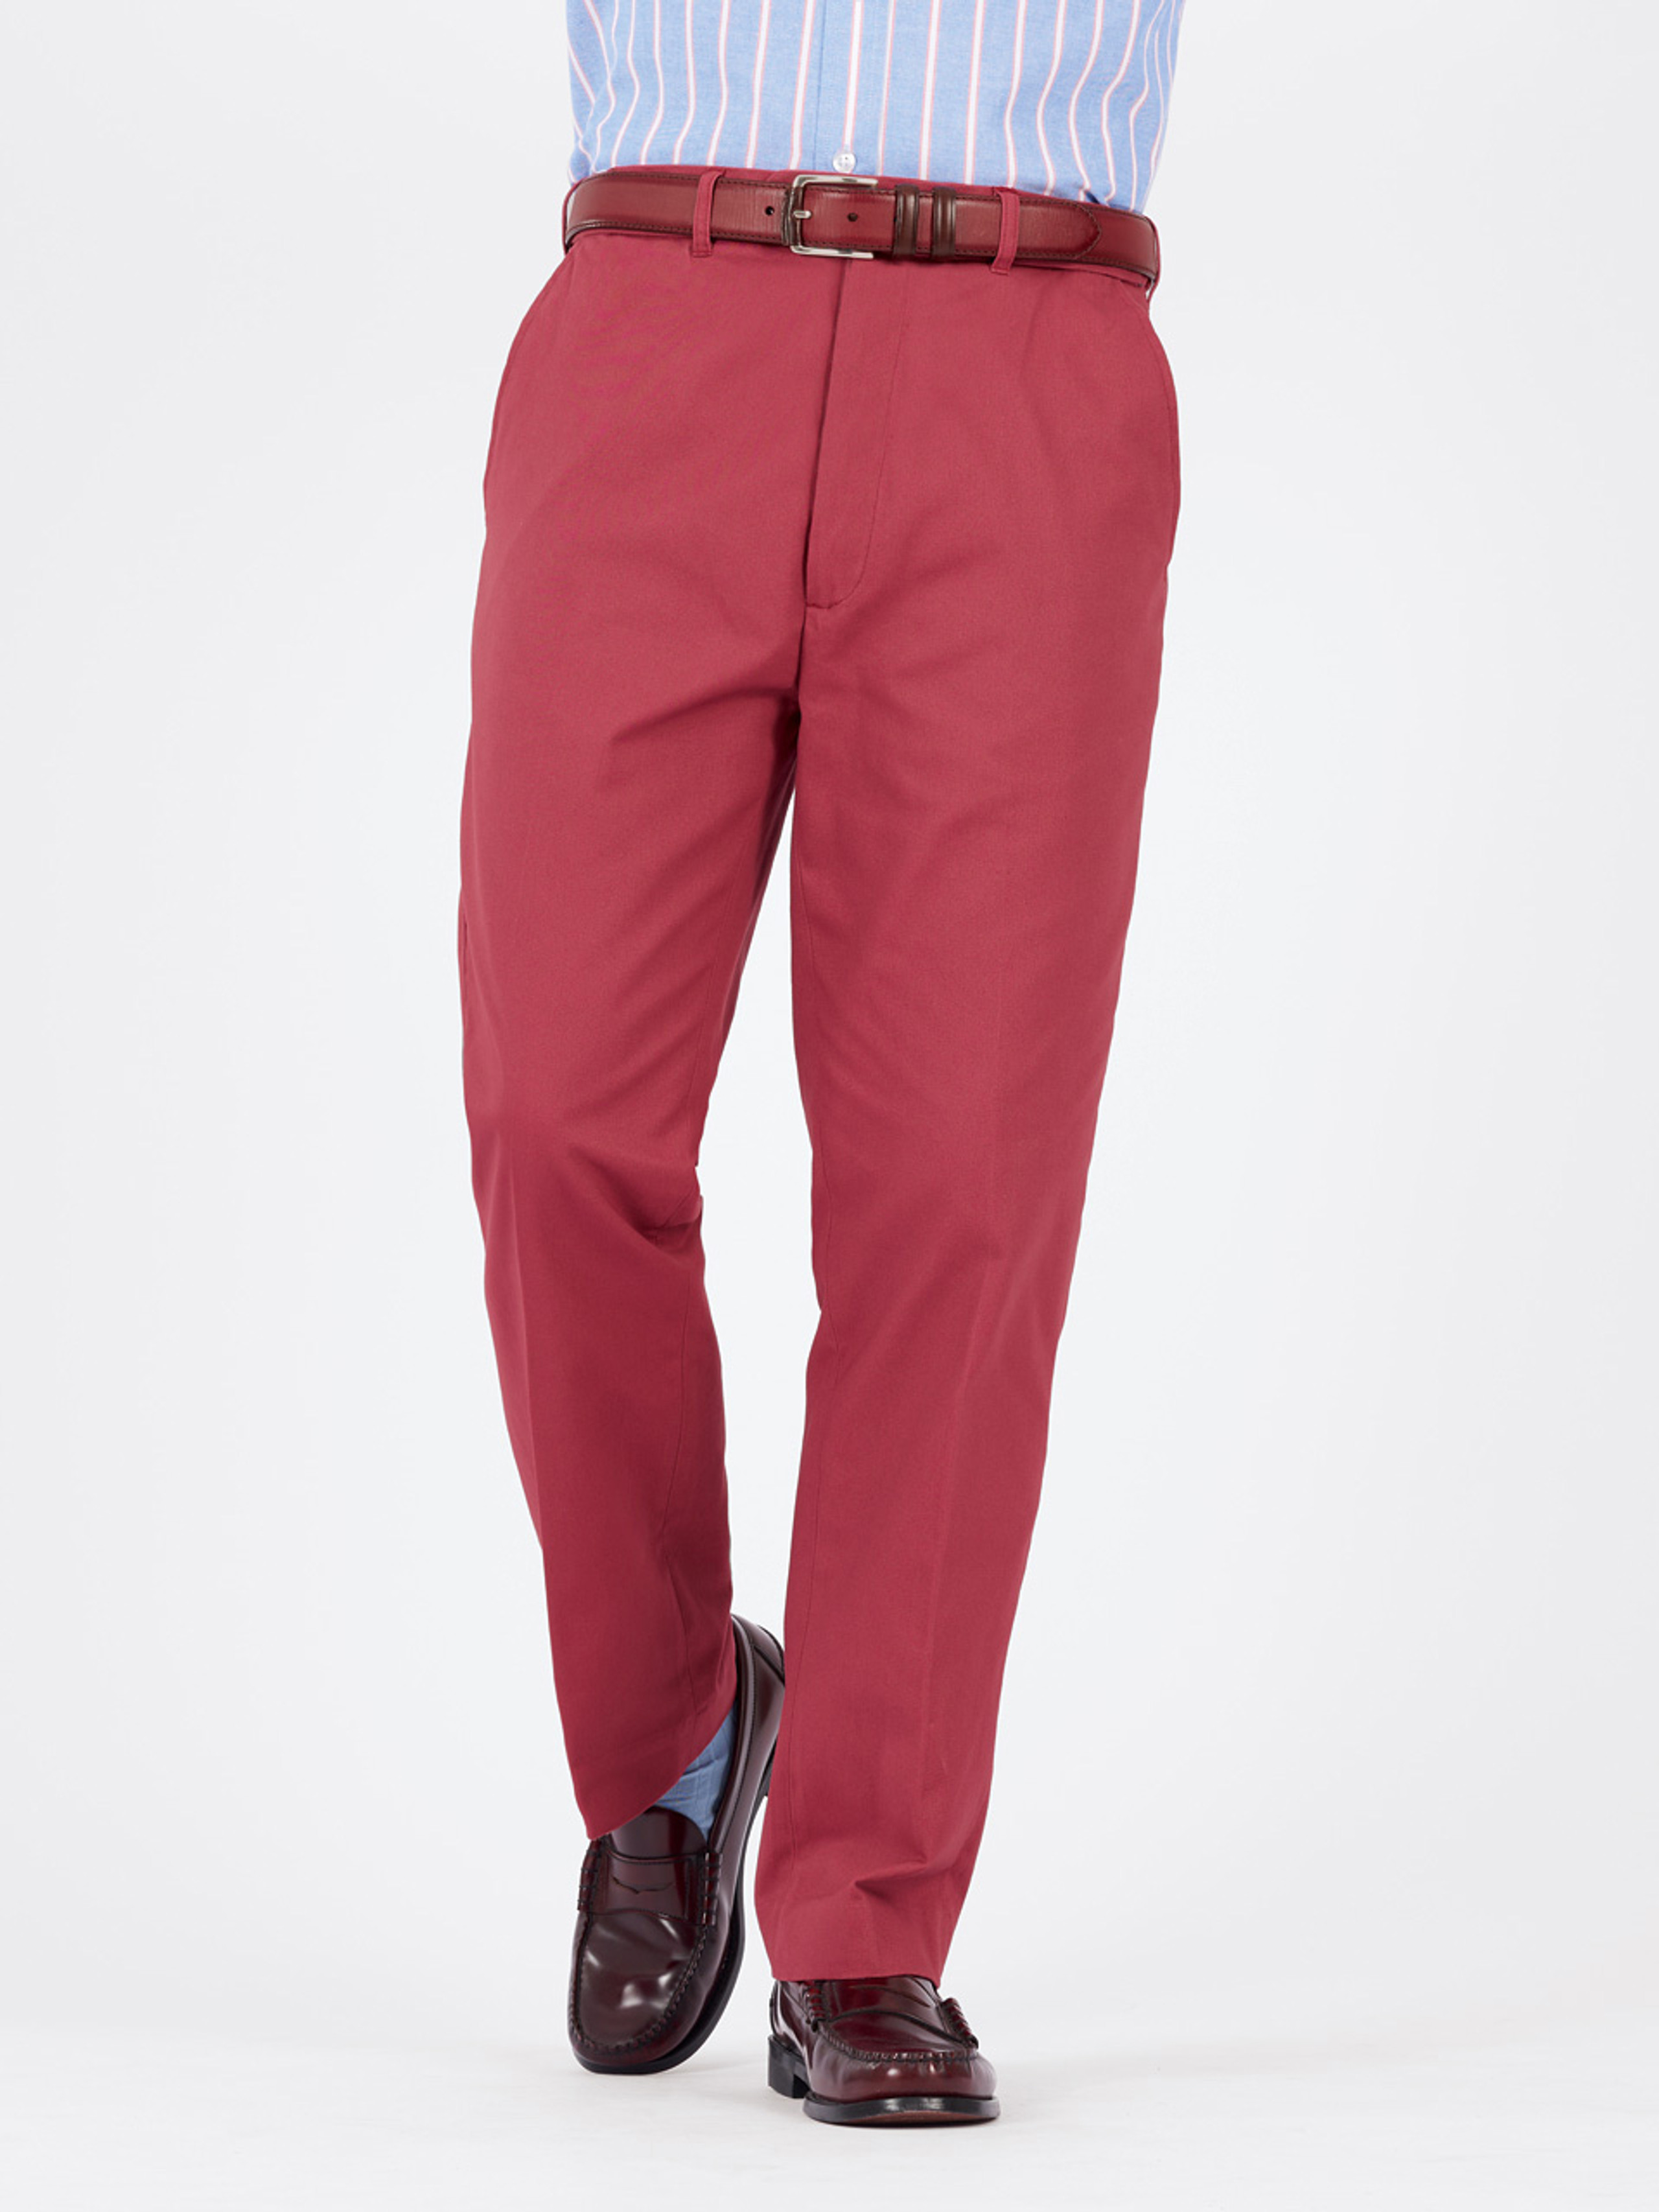 Brick Red Flat Front Chinos | Peter Christian